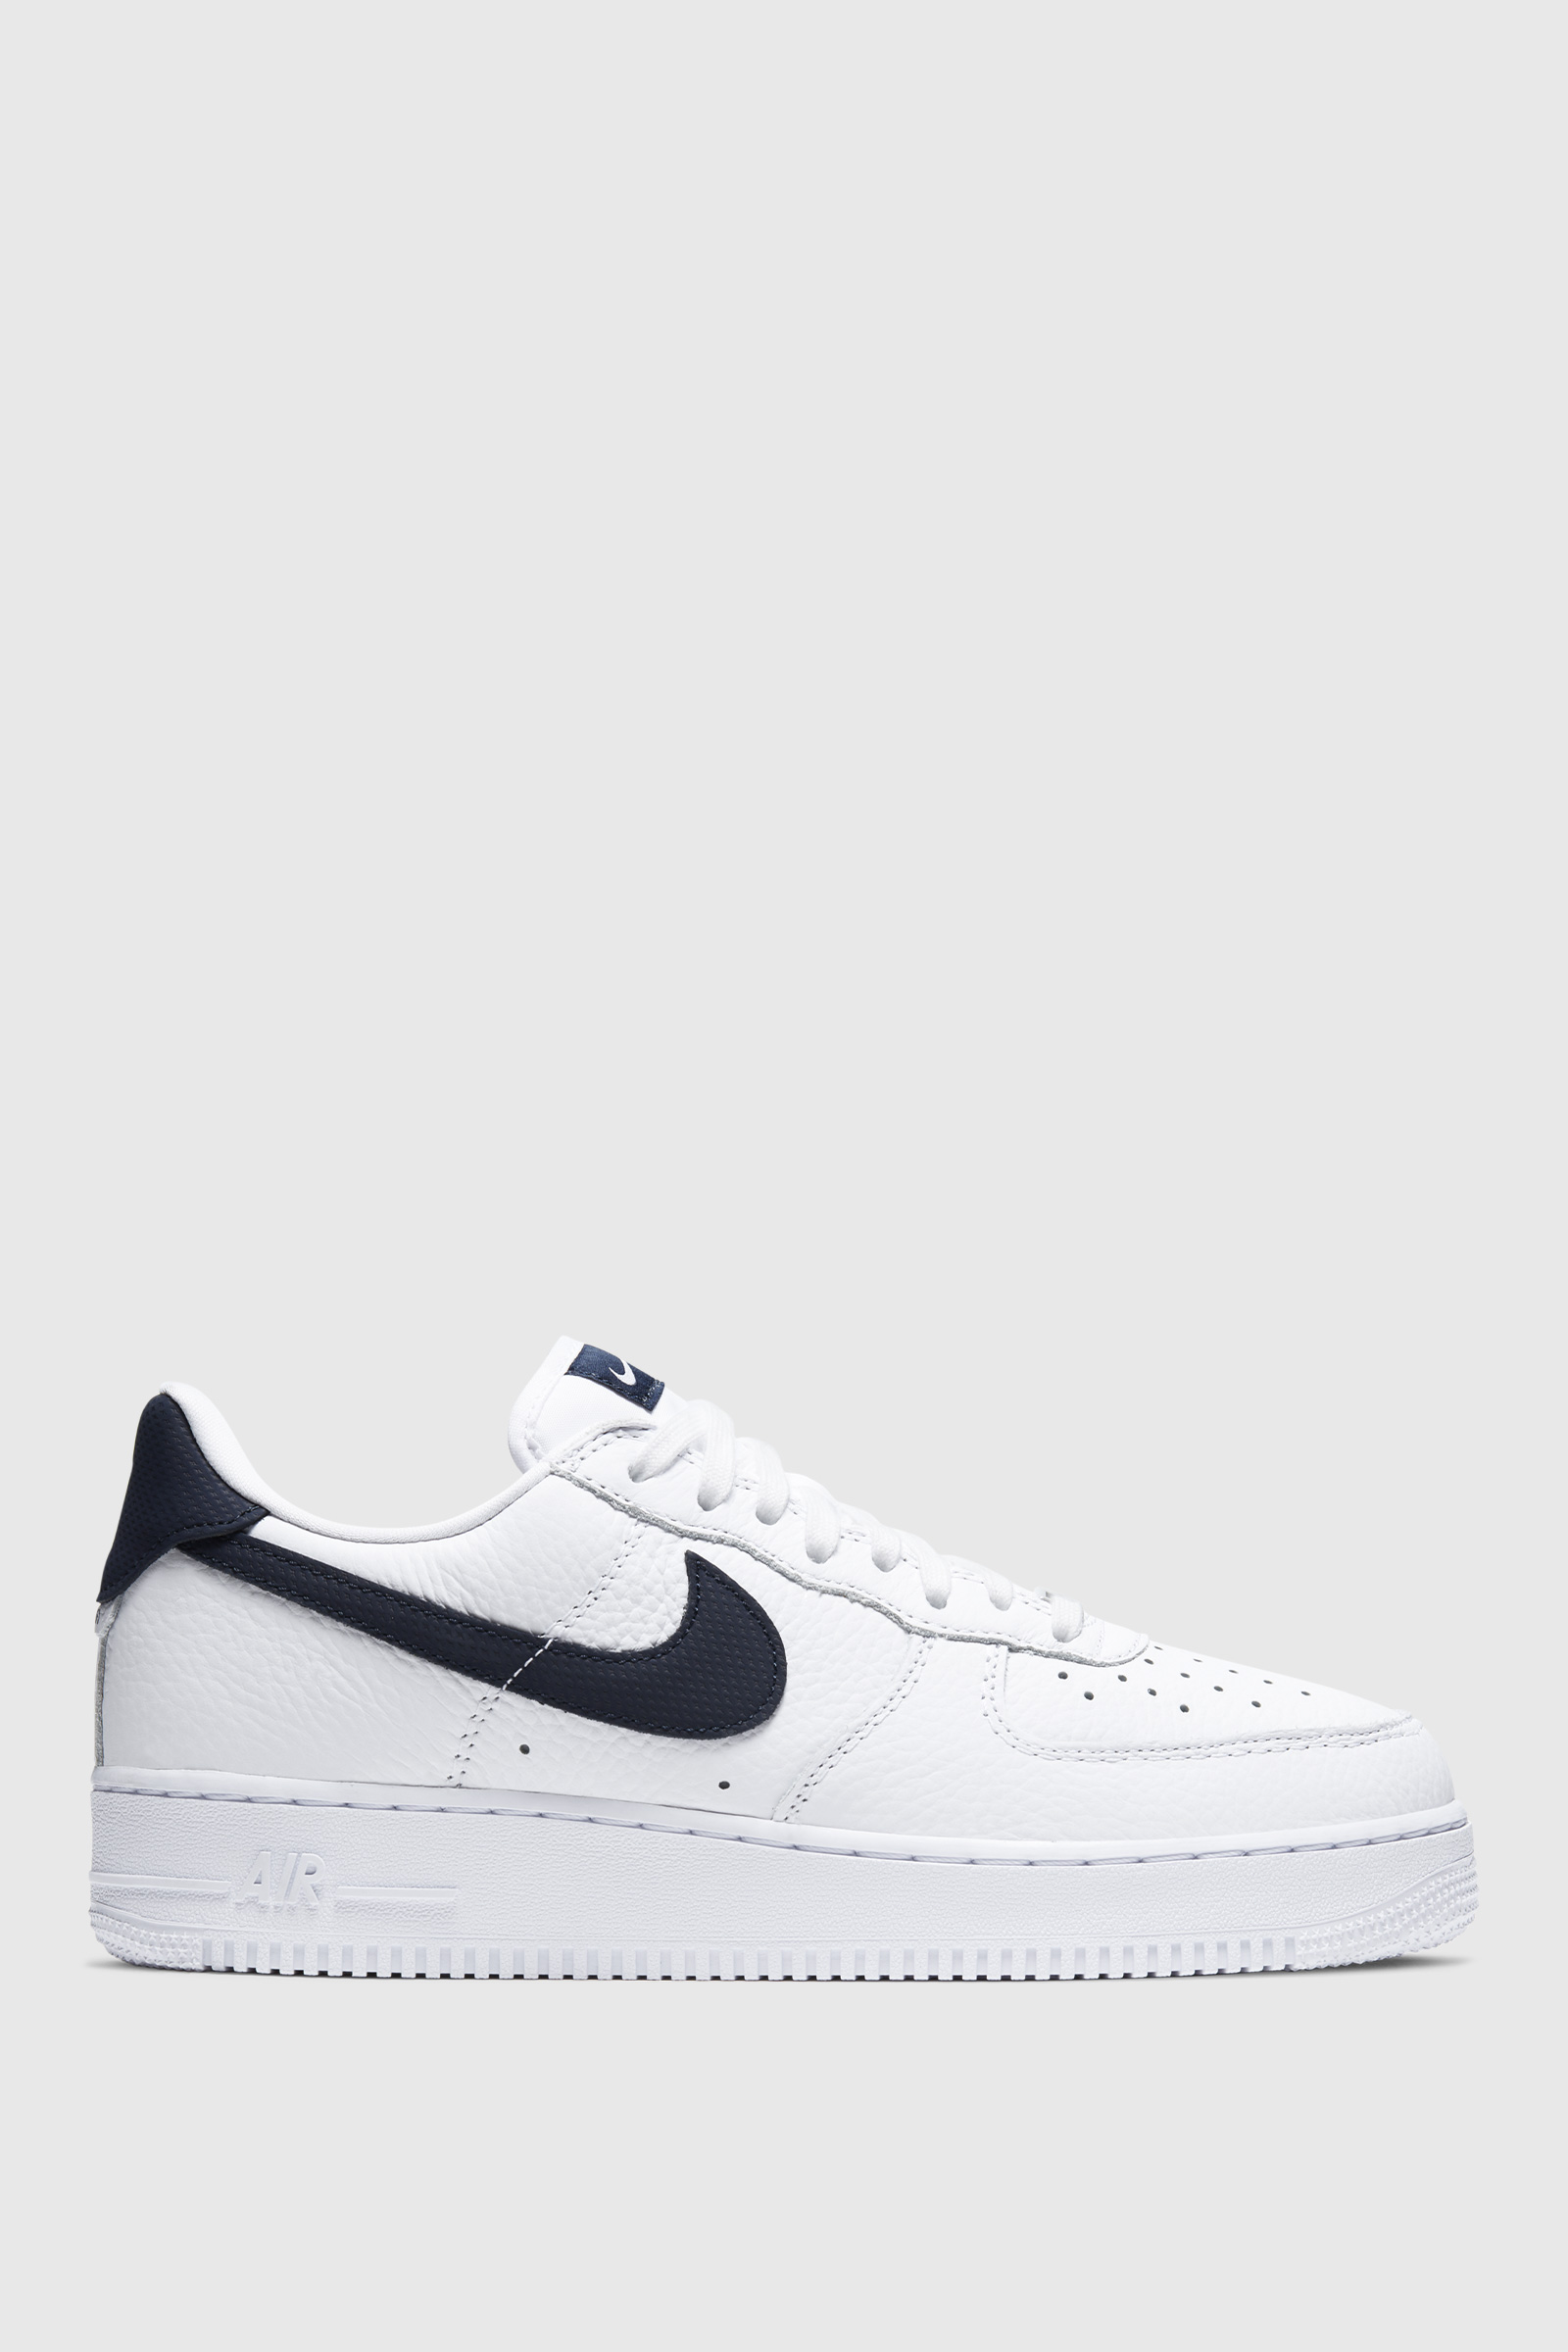 air force 1 next day delivery